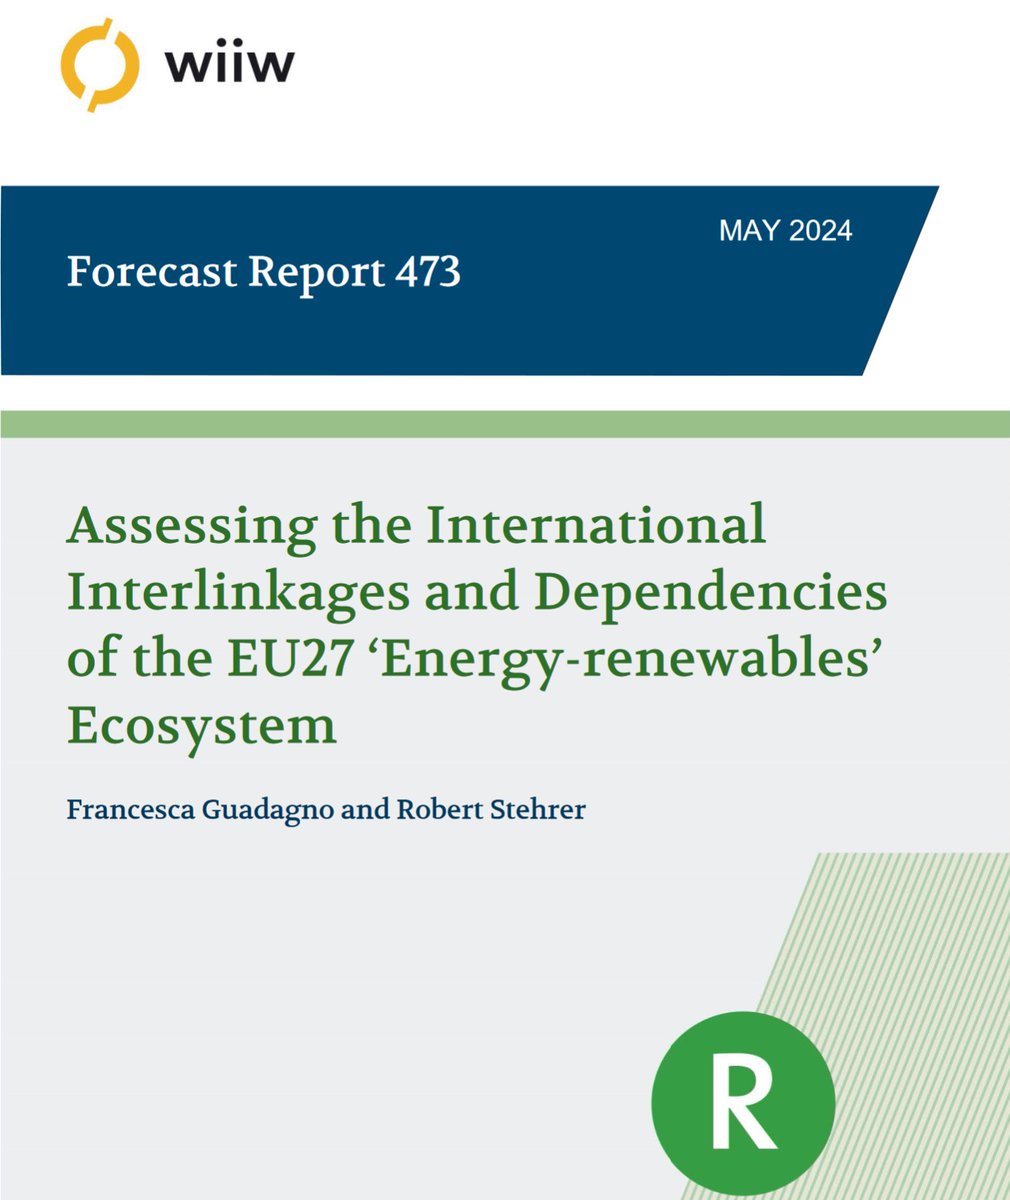 Hot off the press: Our new paper by Francesca Guadagno & @RobertStehrer for the @EU_Commission: In green technologies, #Europe is very dependent on components and raw materials from #China. What can Europe do to reduce this dependency? Download: ➡️wiiw.ac.at/p-6897.html